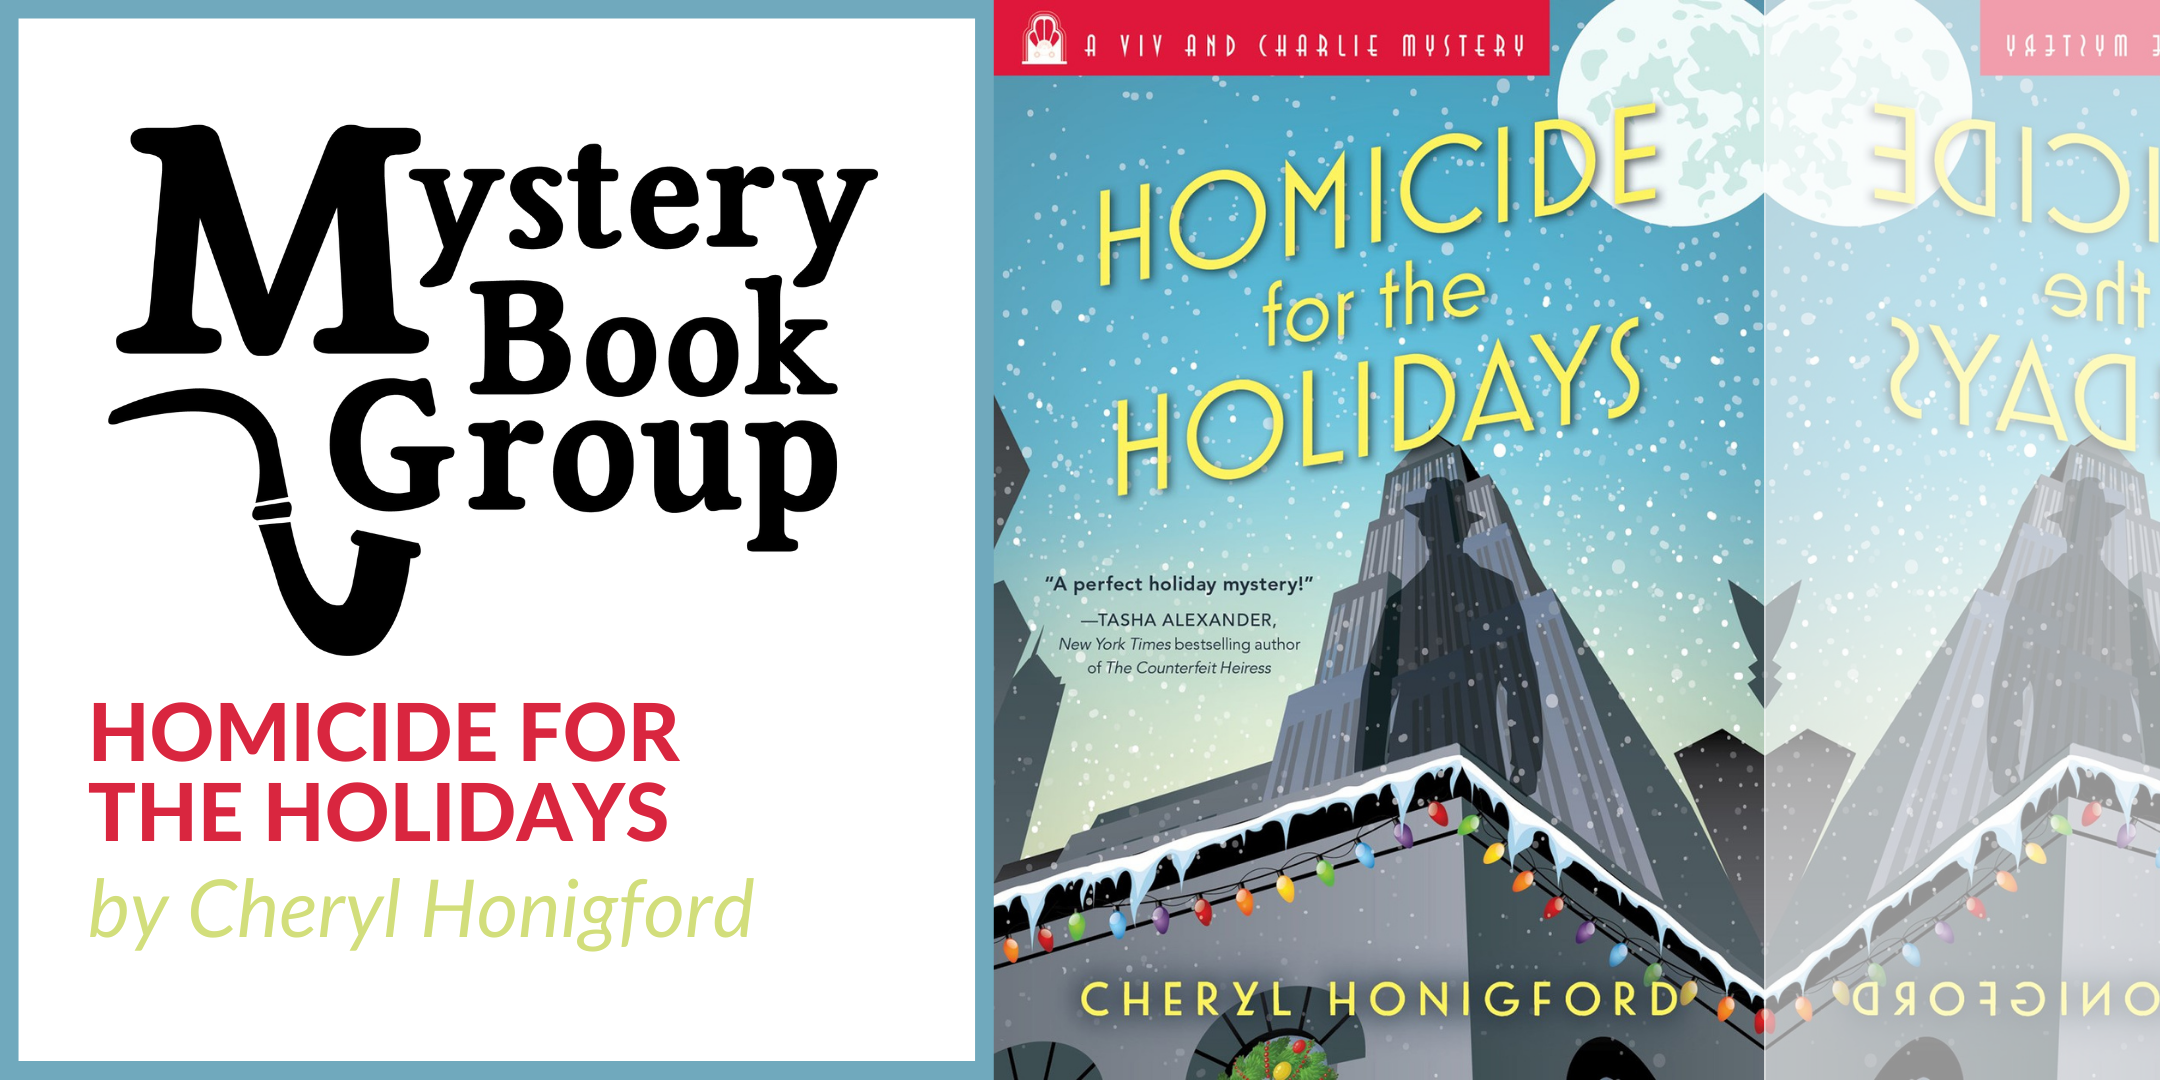 Image of "Mystery Book Group: "Homicide for the Holidays""